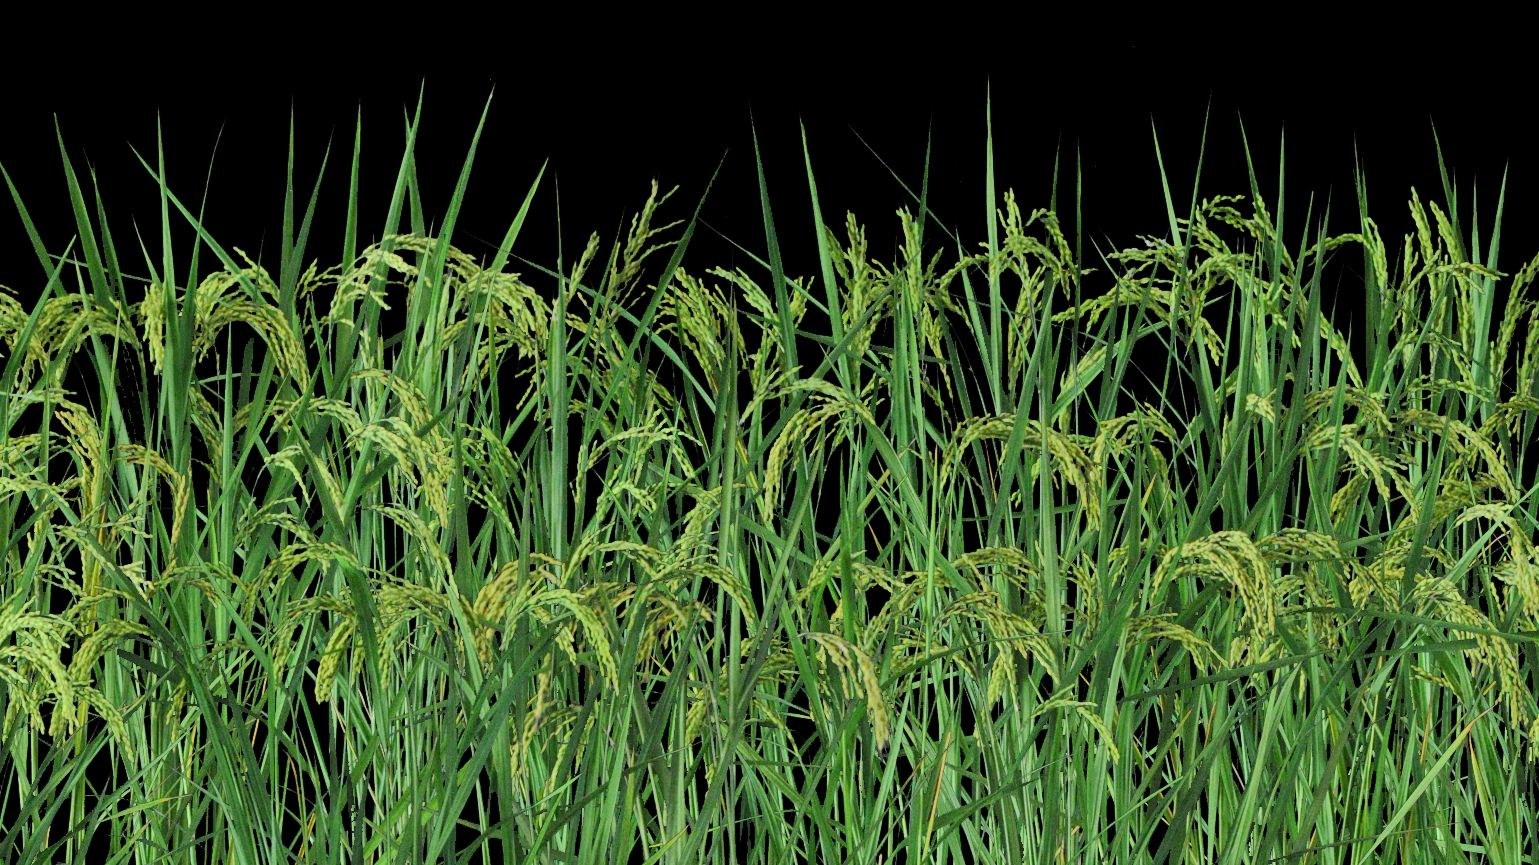 Researchers Boost Rice Yield by Overcoming Trait Tradeoff Between Panicle Number and Size